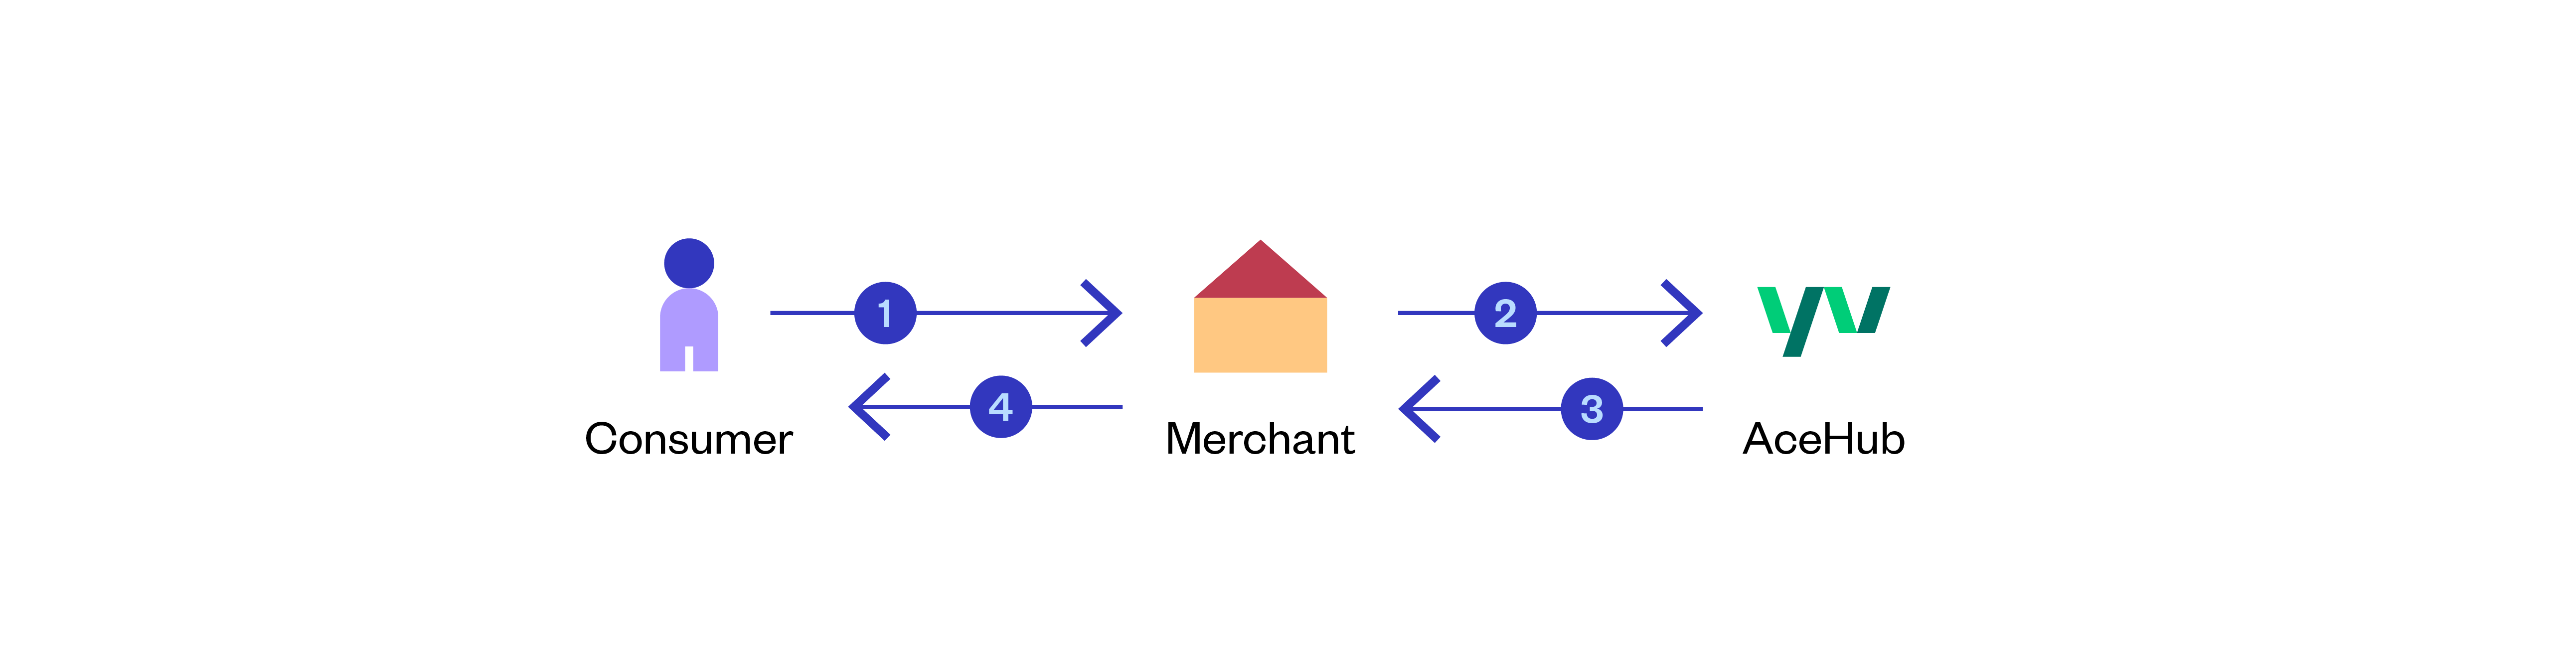 AceHub - Synchronous Payment Flow